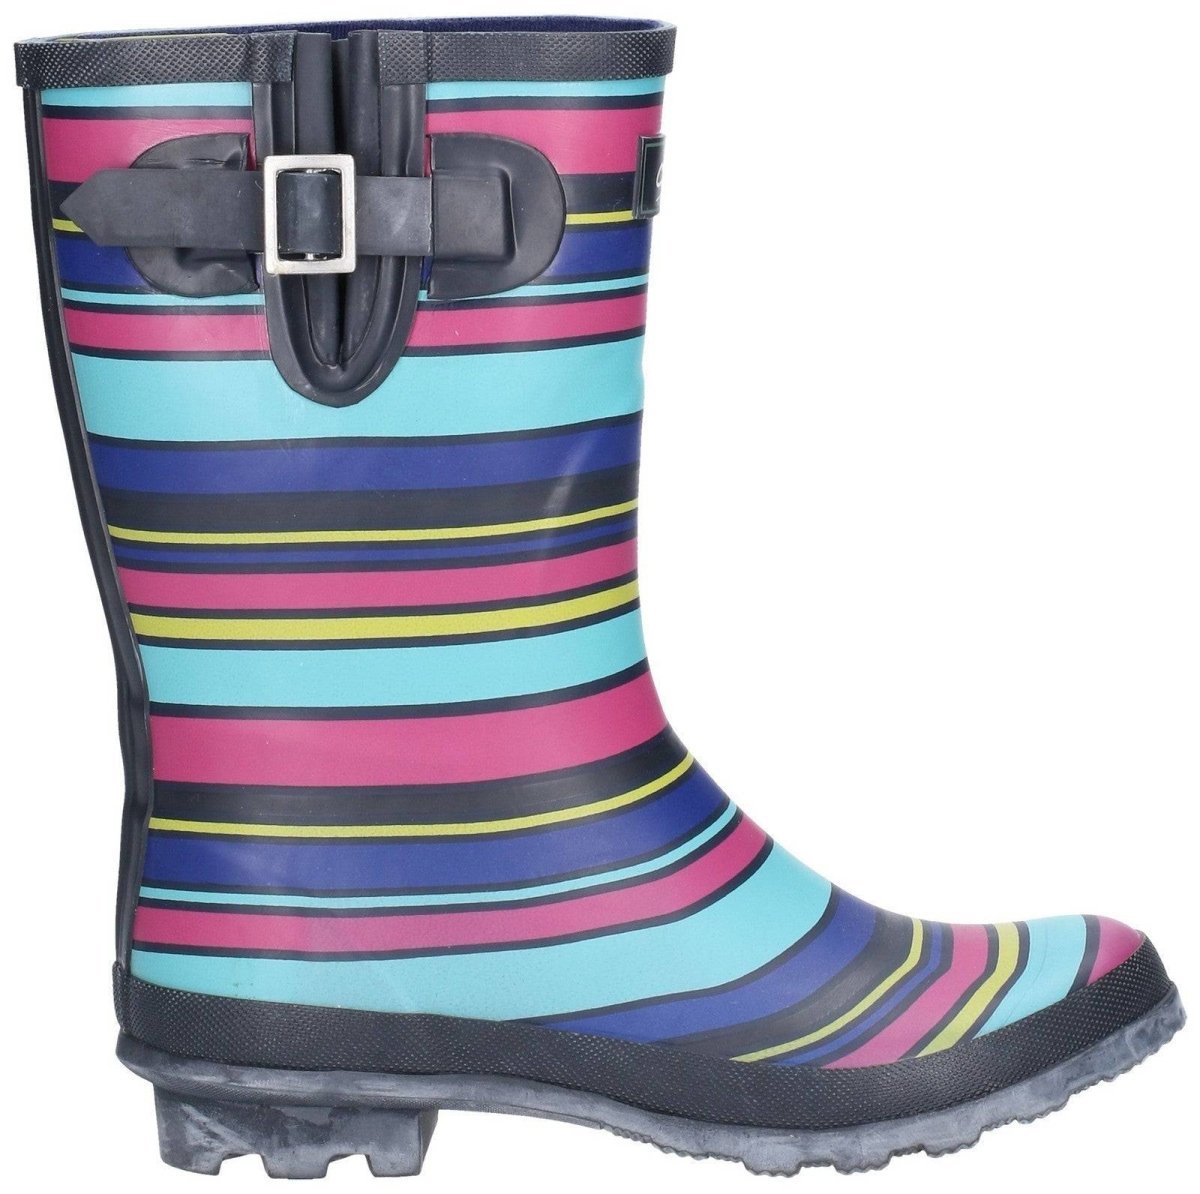 Cotswold Paxford Mid Calf Ladies Wellington Boots - Shoe Store Direct